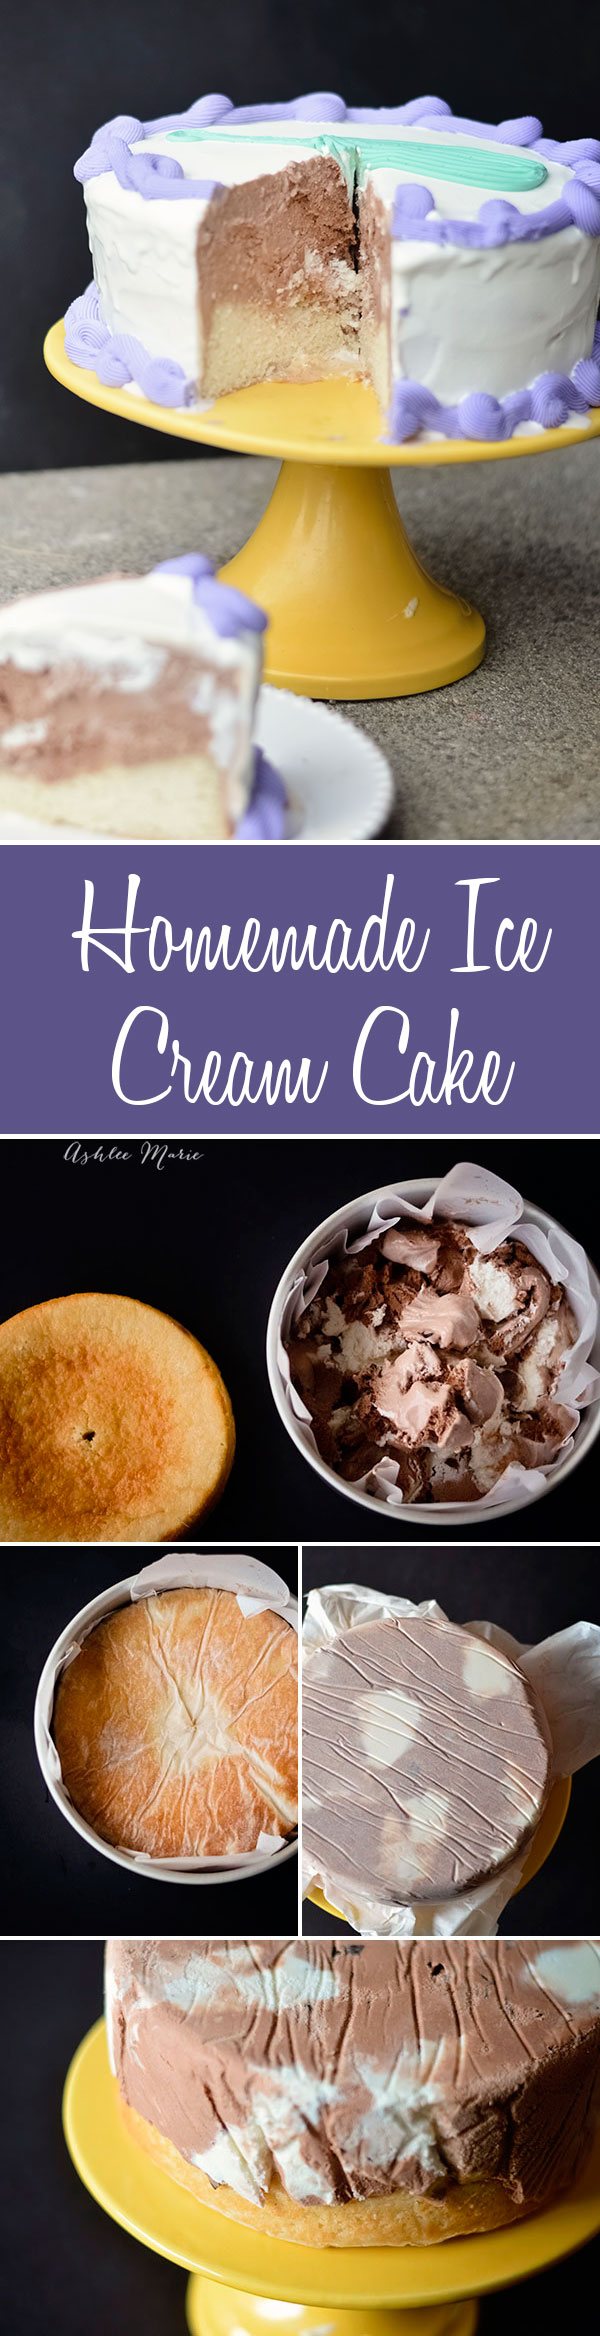 it is easy to make your own ice cream cake with any cake and any ice cream flavor, frost the cake with softened ice cream and decorate with buttercream